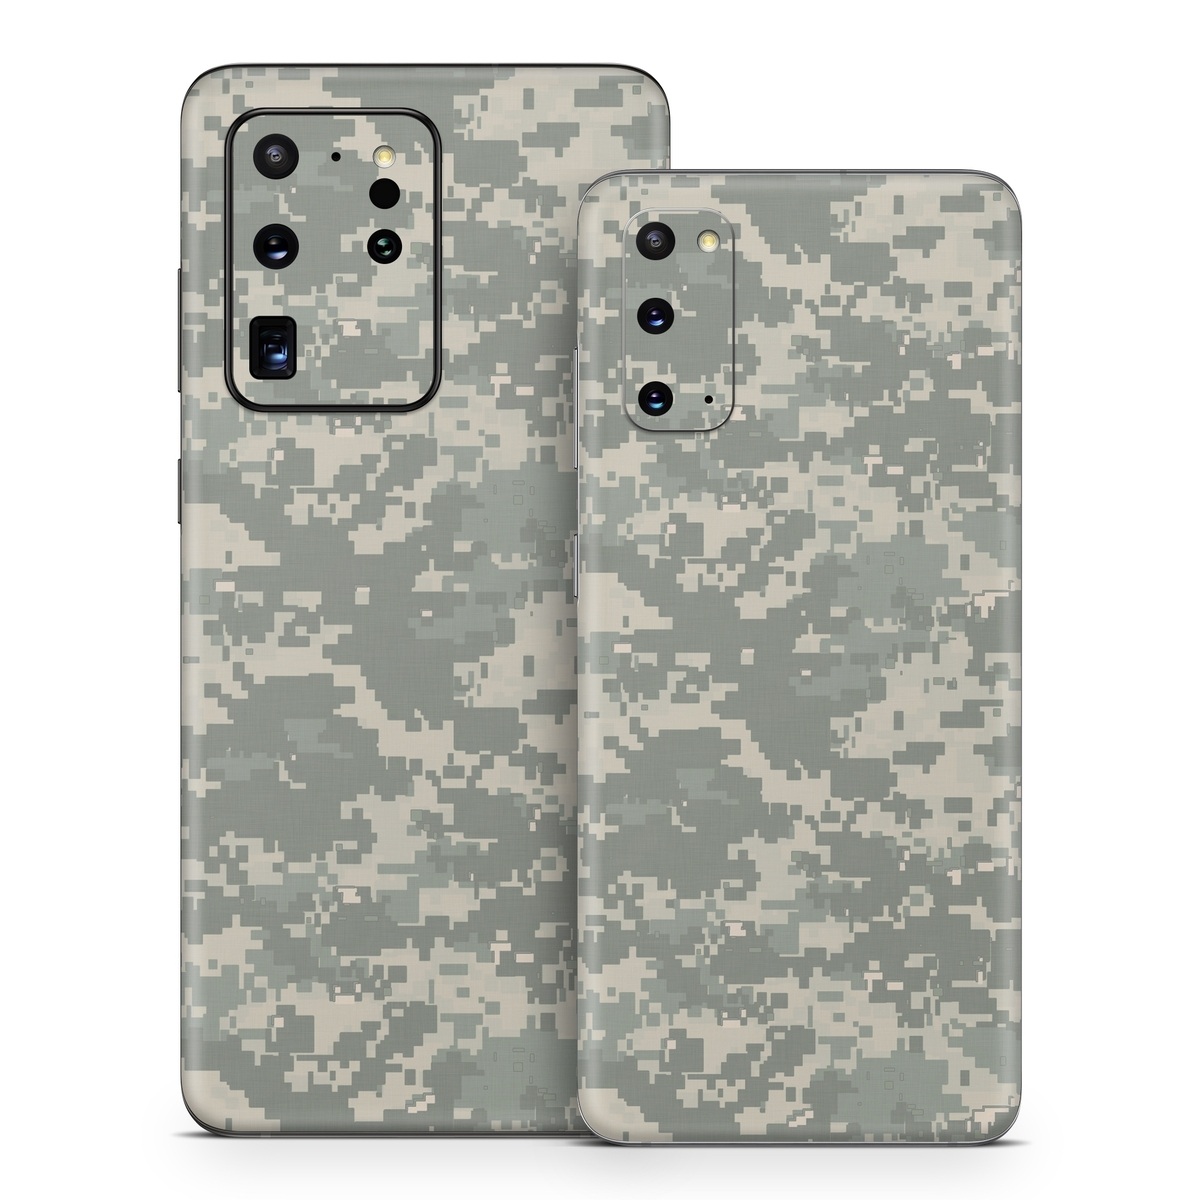 Samsung Galaxy S20 Series Skin design of Military camouflage, Green, Pattern, Uniform, Camouflage, Design, Wallpaper, with gray, green colors